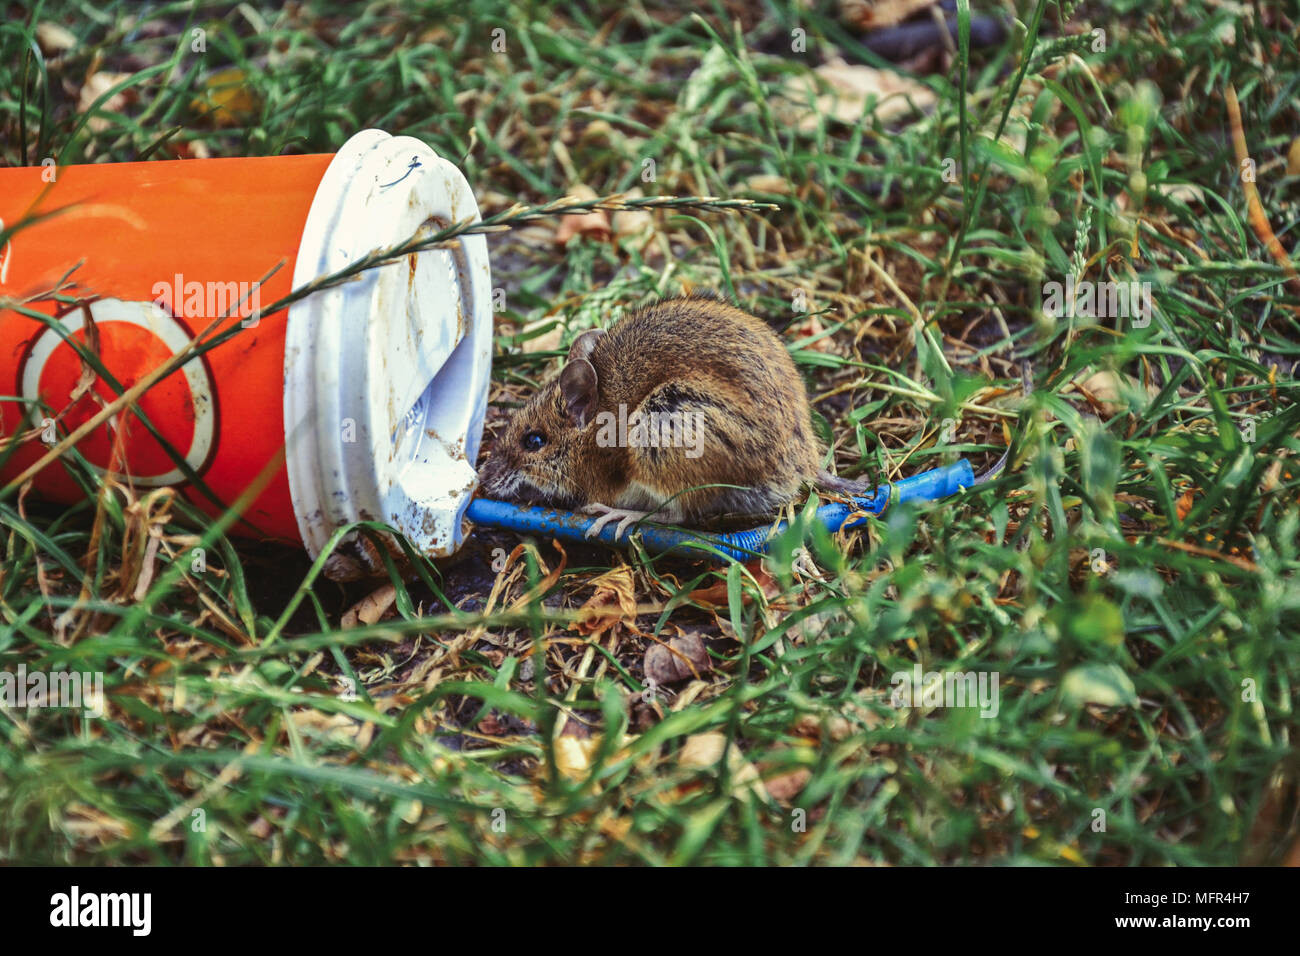 Little rat sitting near plastic cup thrown on the grass Stock Photo